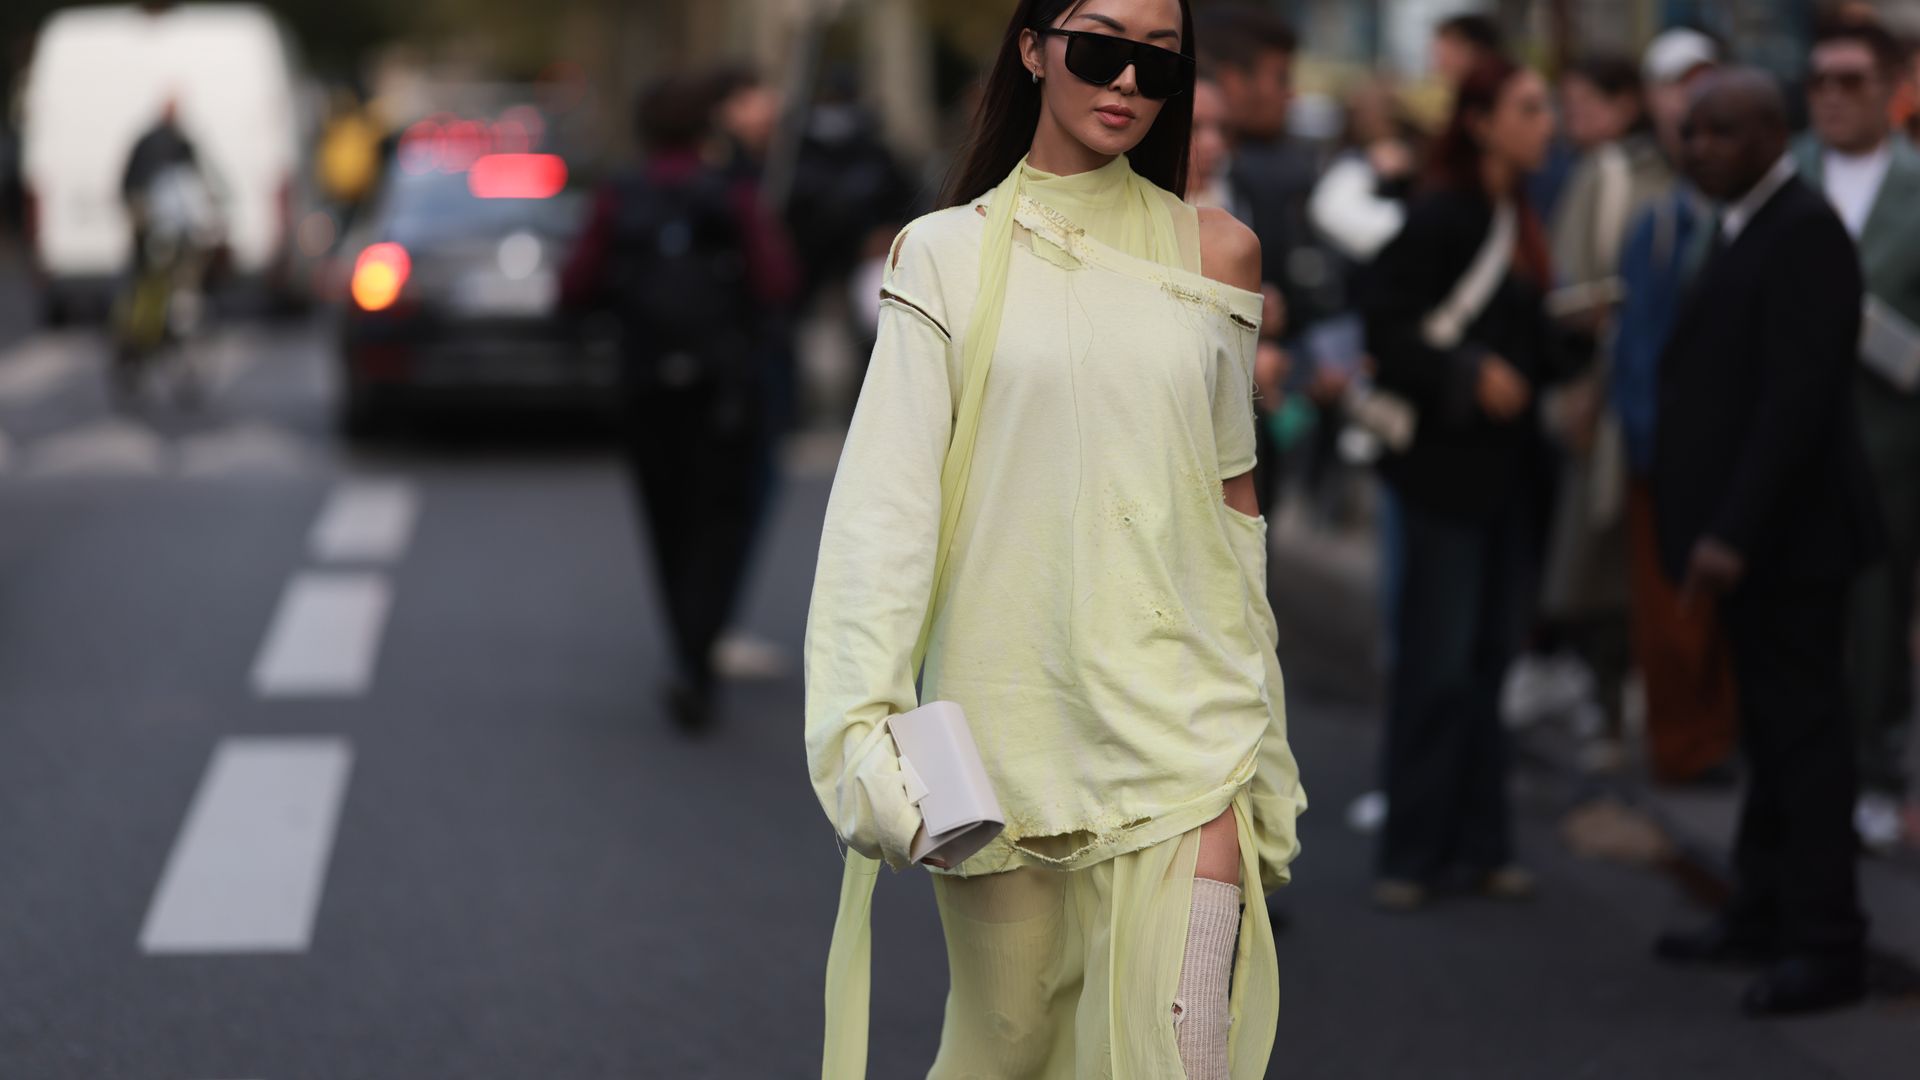 PARIS, FRANCE - SEPTEMBER 28: Chriselle Lim seen wearing a total Acne Studios look, outside Acne Studios during Paris Fashion Week on September 28, 2022 in Paris, France. (Photo by Jeremy Moeller/Getty Images)